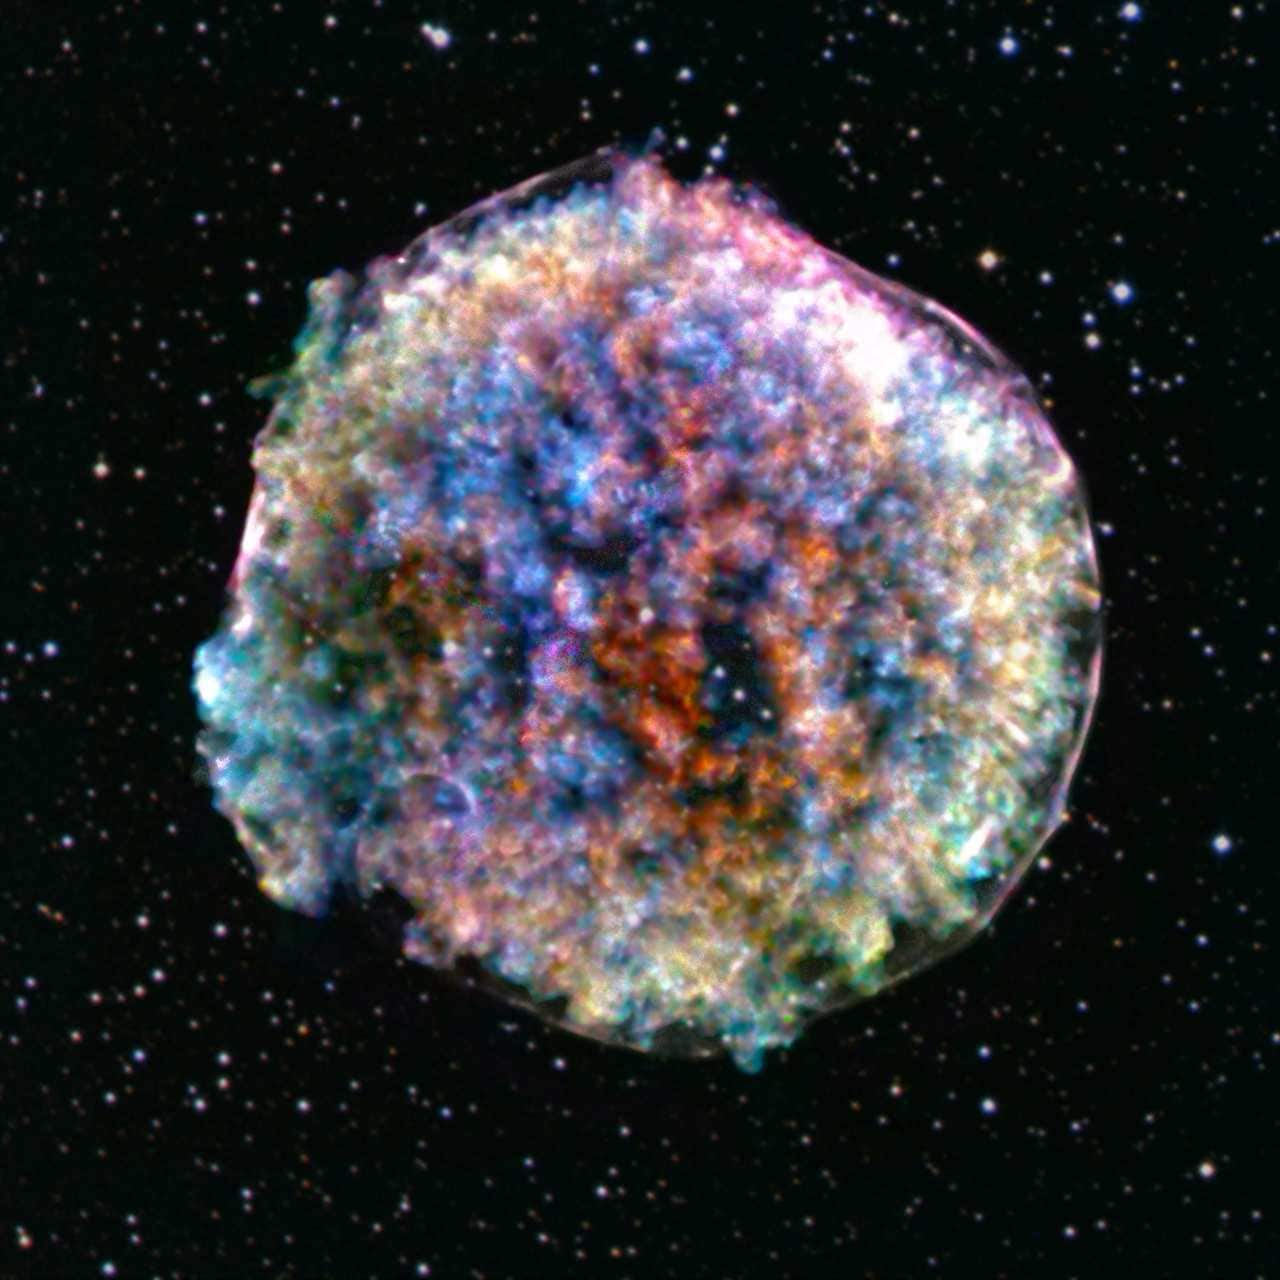 X-ray images of Tycho’s supernova remnant (Tycho’s SNR) show a pattern of bright clumps and fainter holes. Image: NASA/Chandra